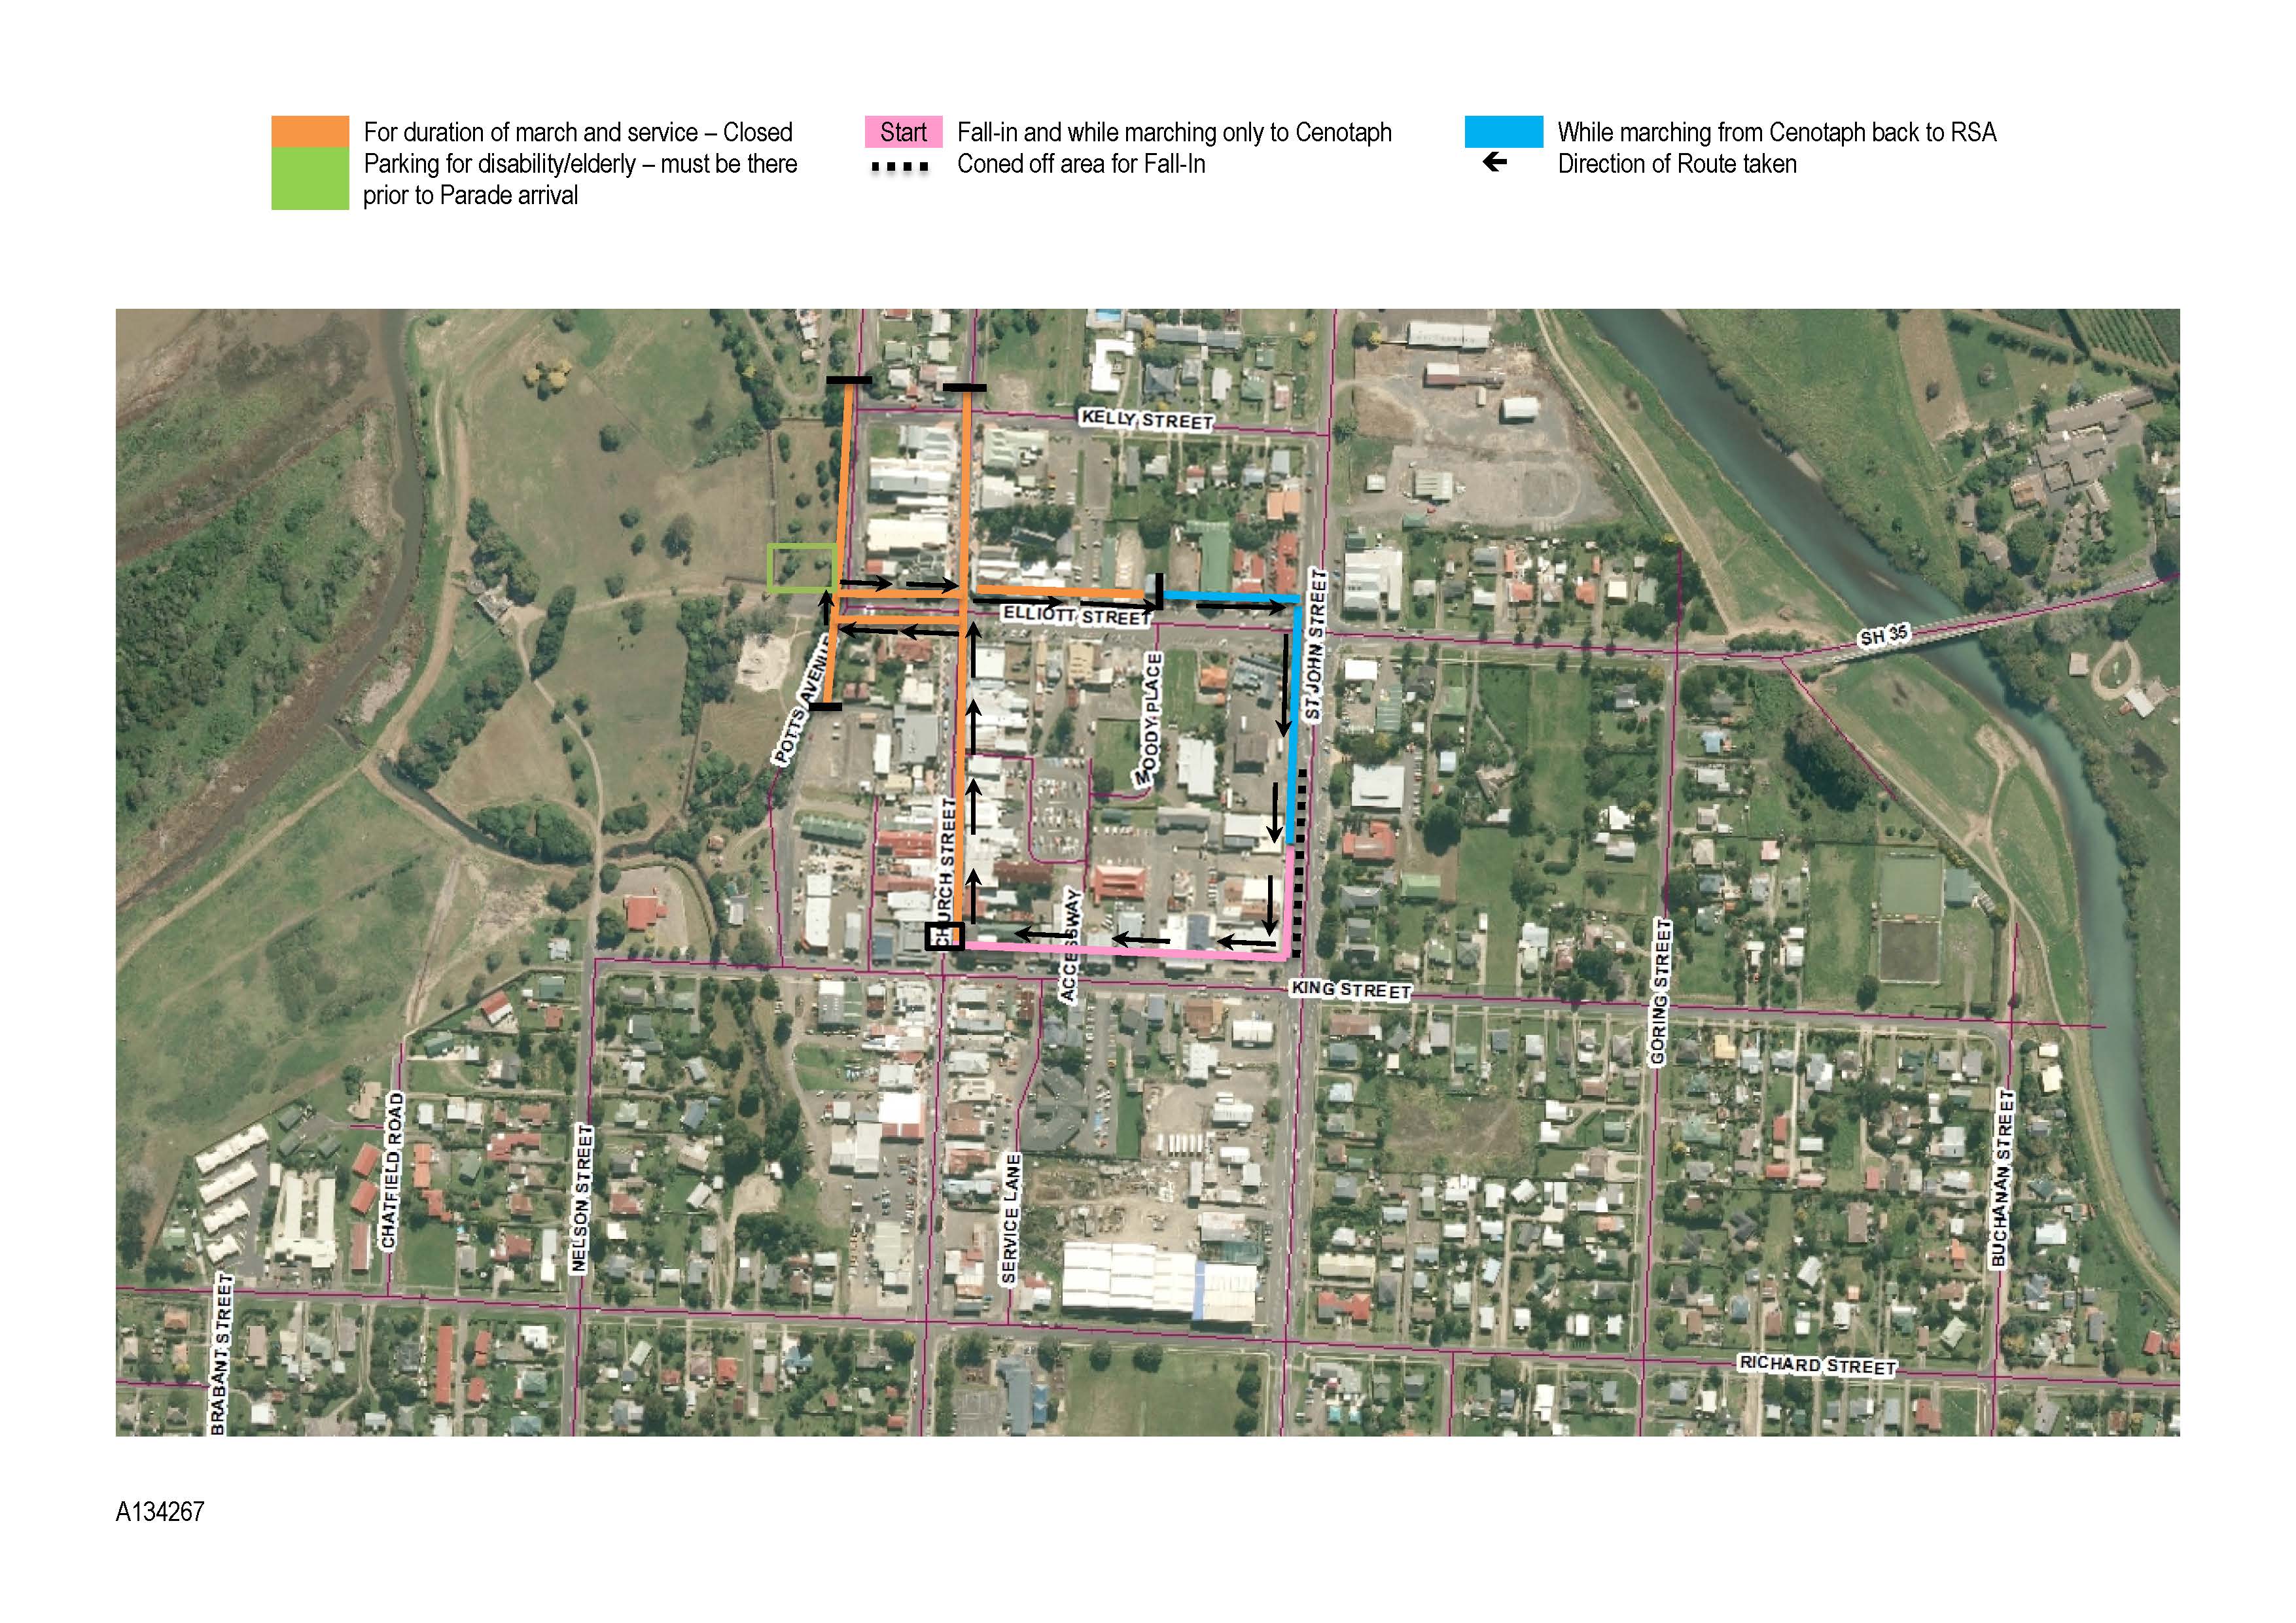 An aerial map of Opotiki town showing the march route and the street closures